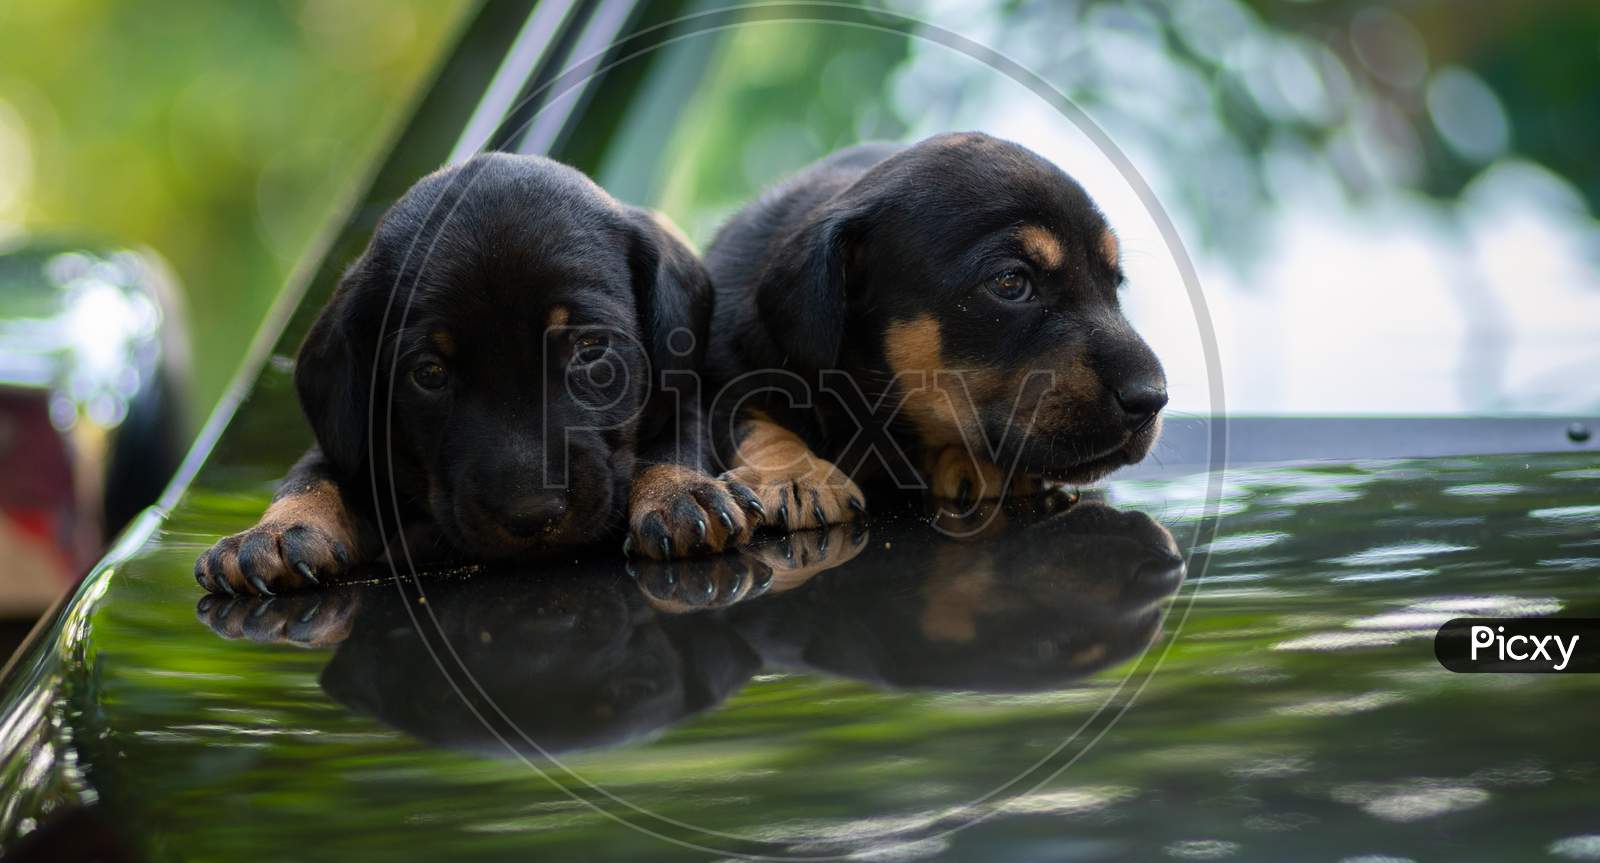 Adorable Newborn Baby Badger Dog Puppies In Car Hood Together, Sharing The Warmth Of The Bodies, Innocent Faces Looking At The Camera, Natural Light Portraiture Of Two Weeks Old, Two Dog Babies.